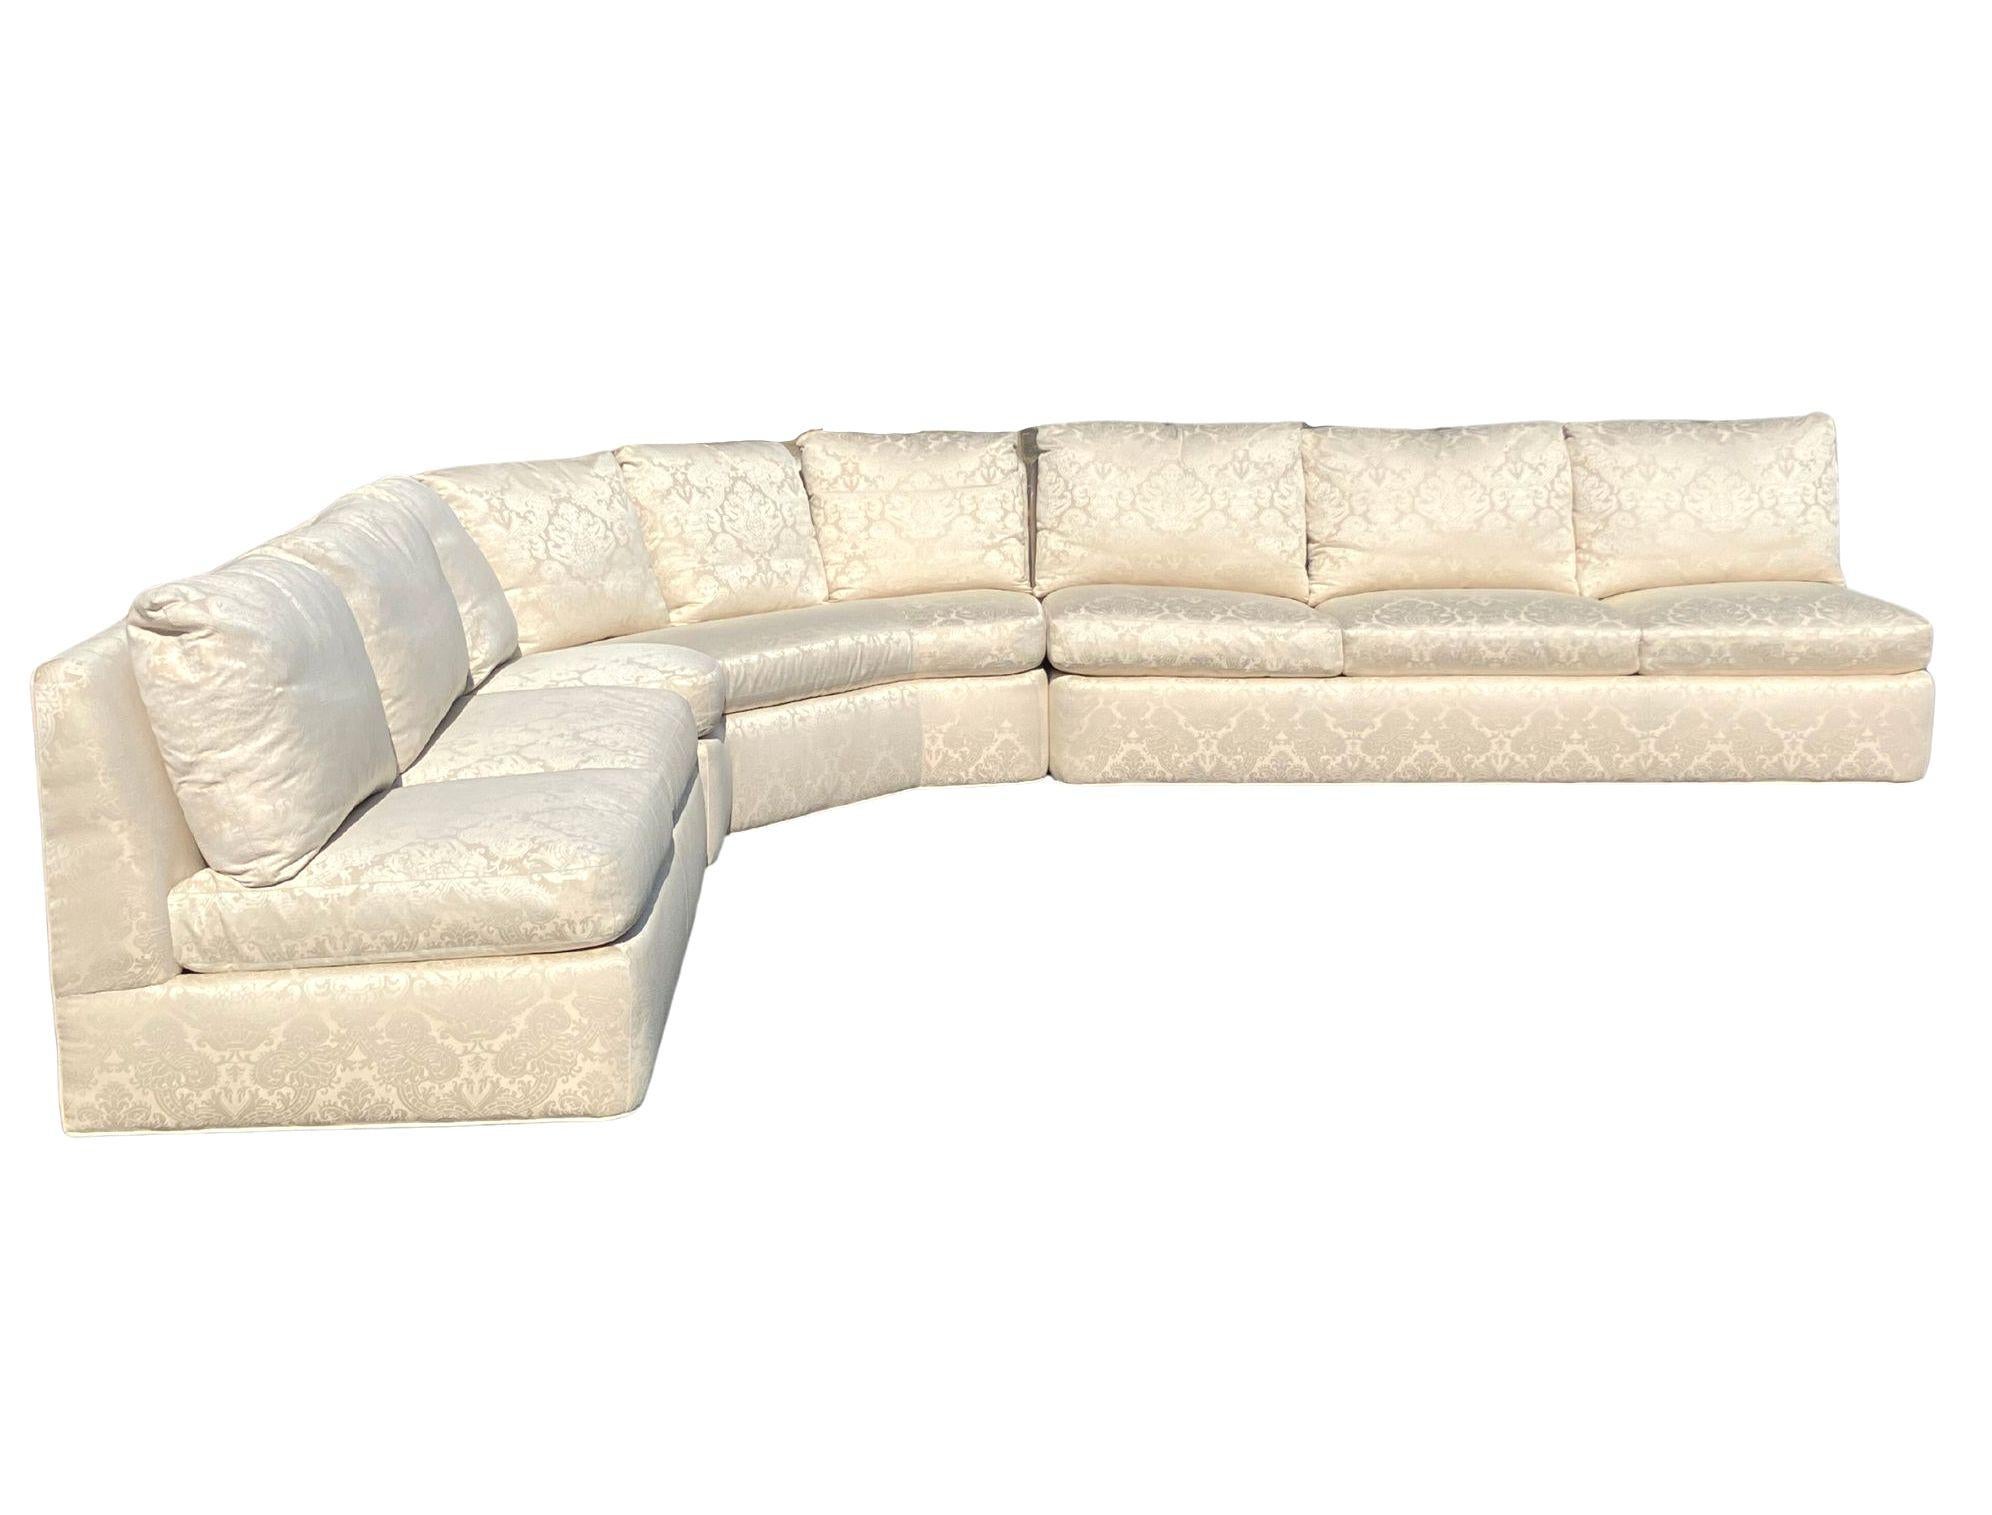 A Contemporary style three-piece sectional armless slipper sofa by Baker Furniture. Hardwood frame construction; upholstered in a soft white color brocade fabric, armless with a slipper style back, six reversible bottom cushions, nine reversible